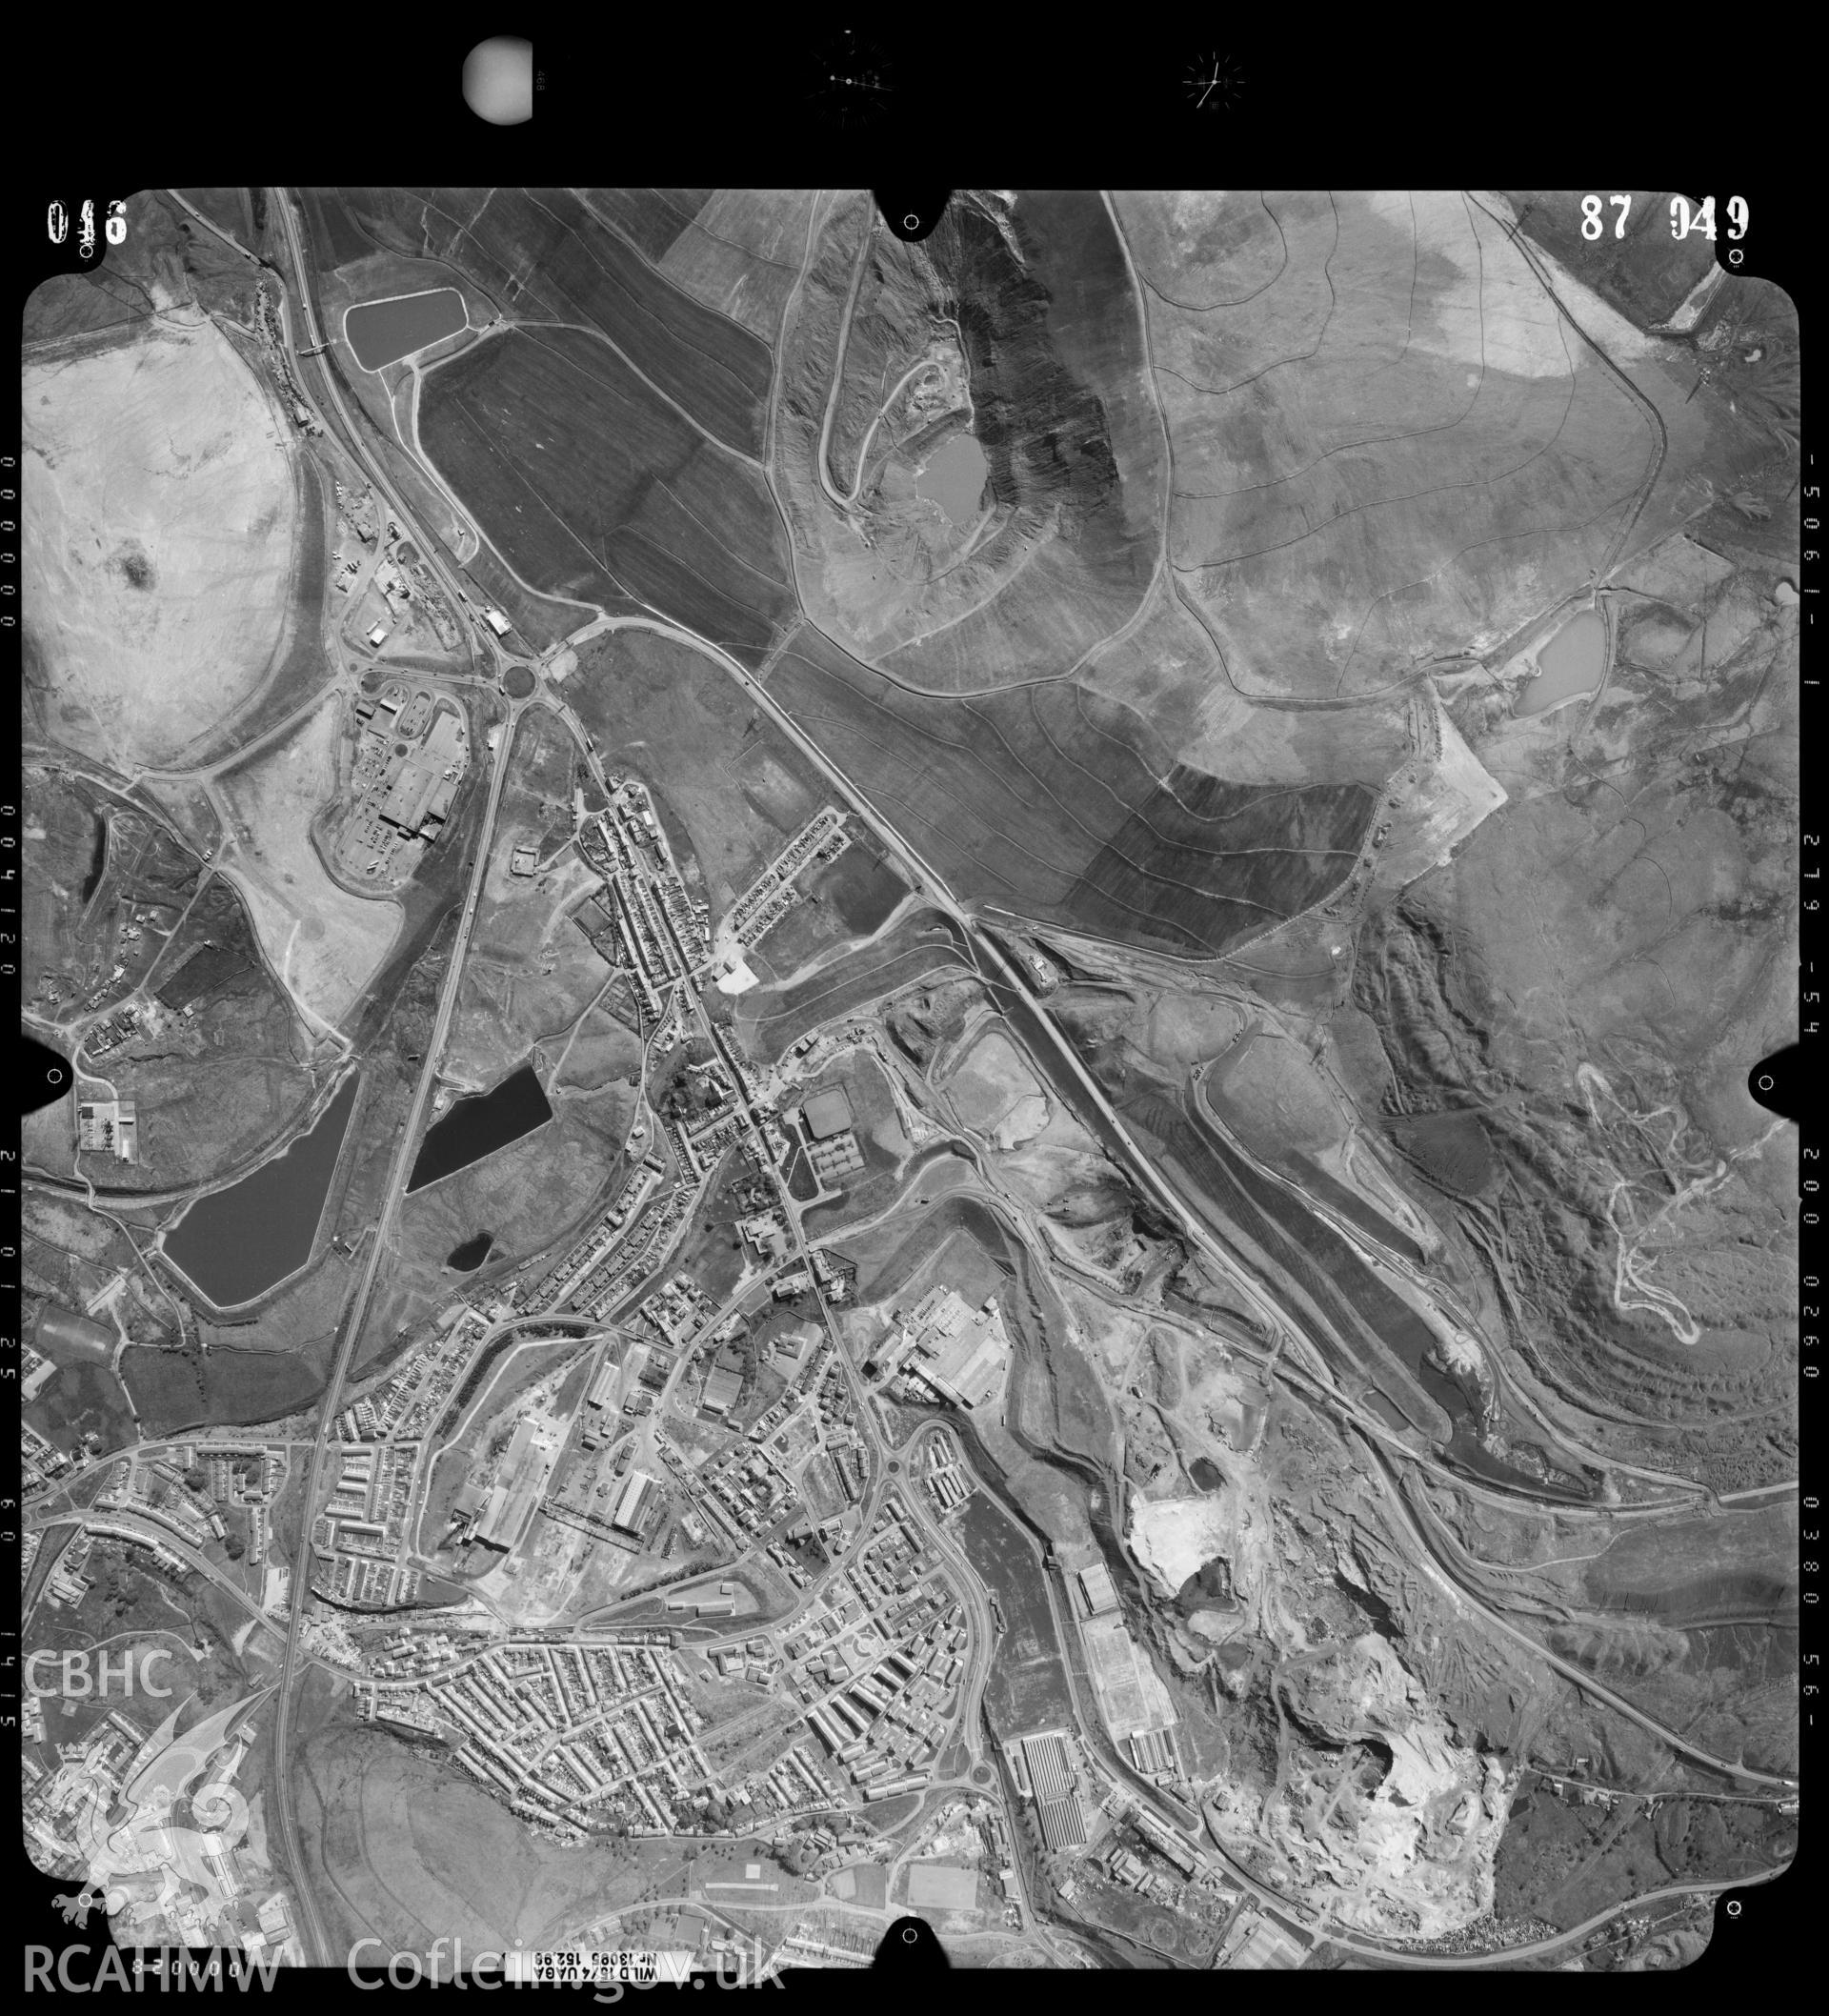 Digitized copy of an aerial photograph showing the Dowlais area, taken by Ordnance Survey, 1987.